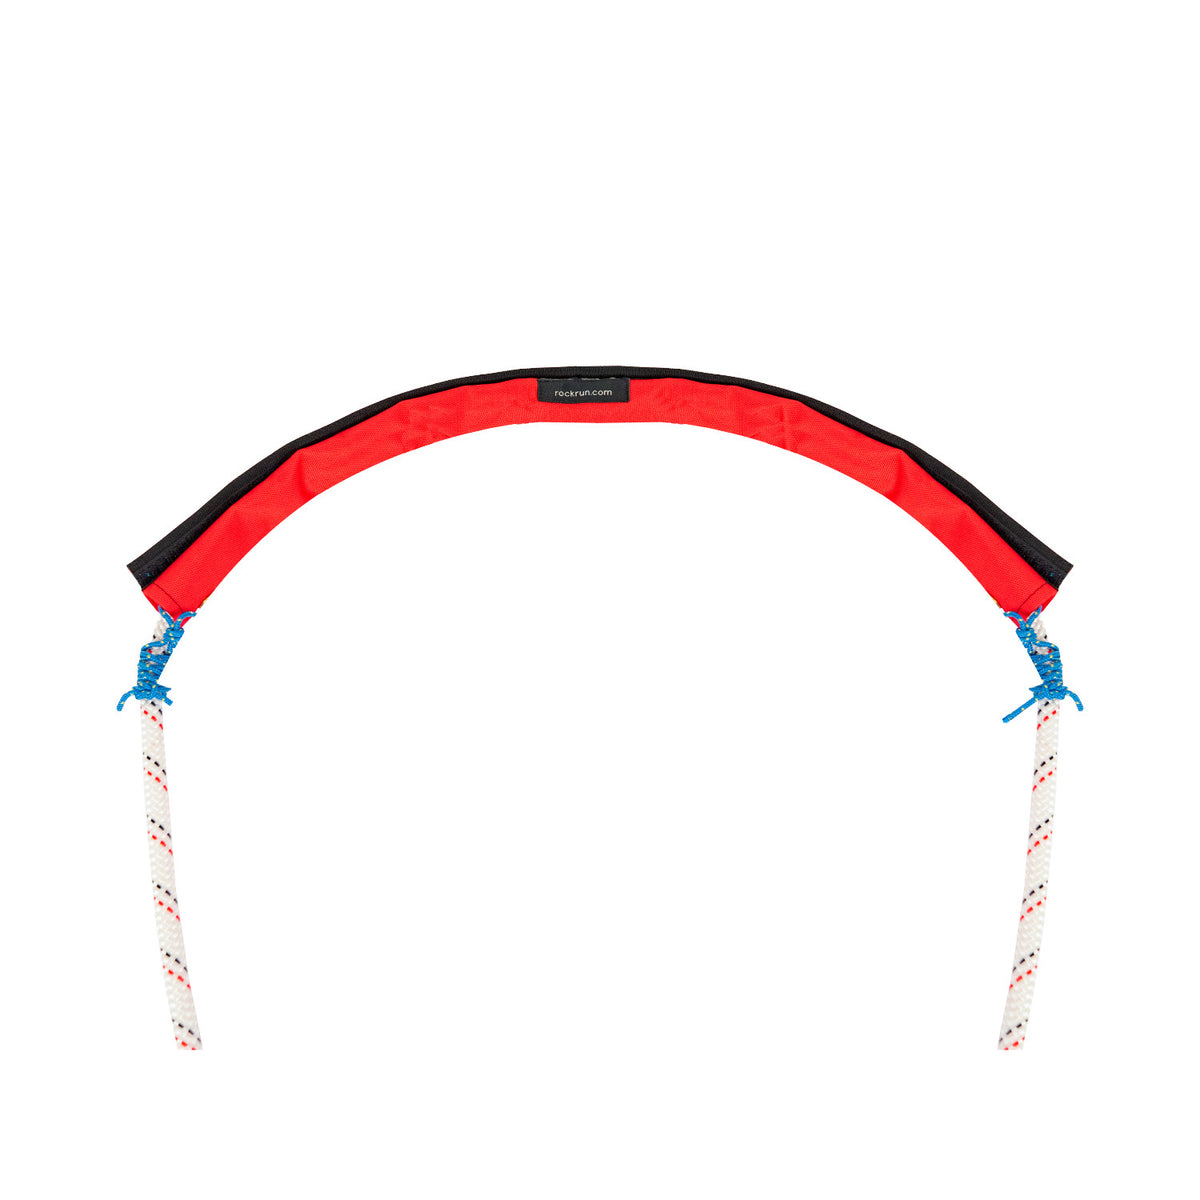 rock + run rope protector pro in red 